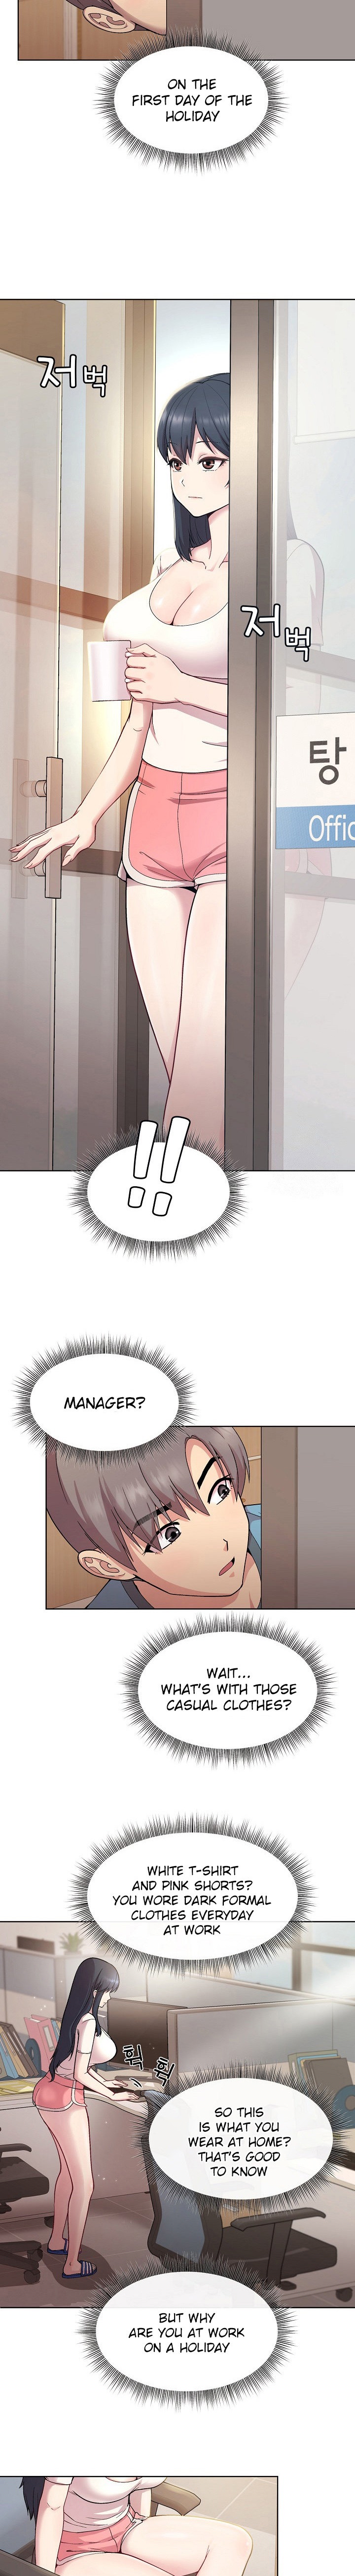 Playing a game with my Busty Manager - Chapter 1 Page 11